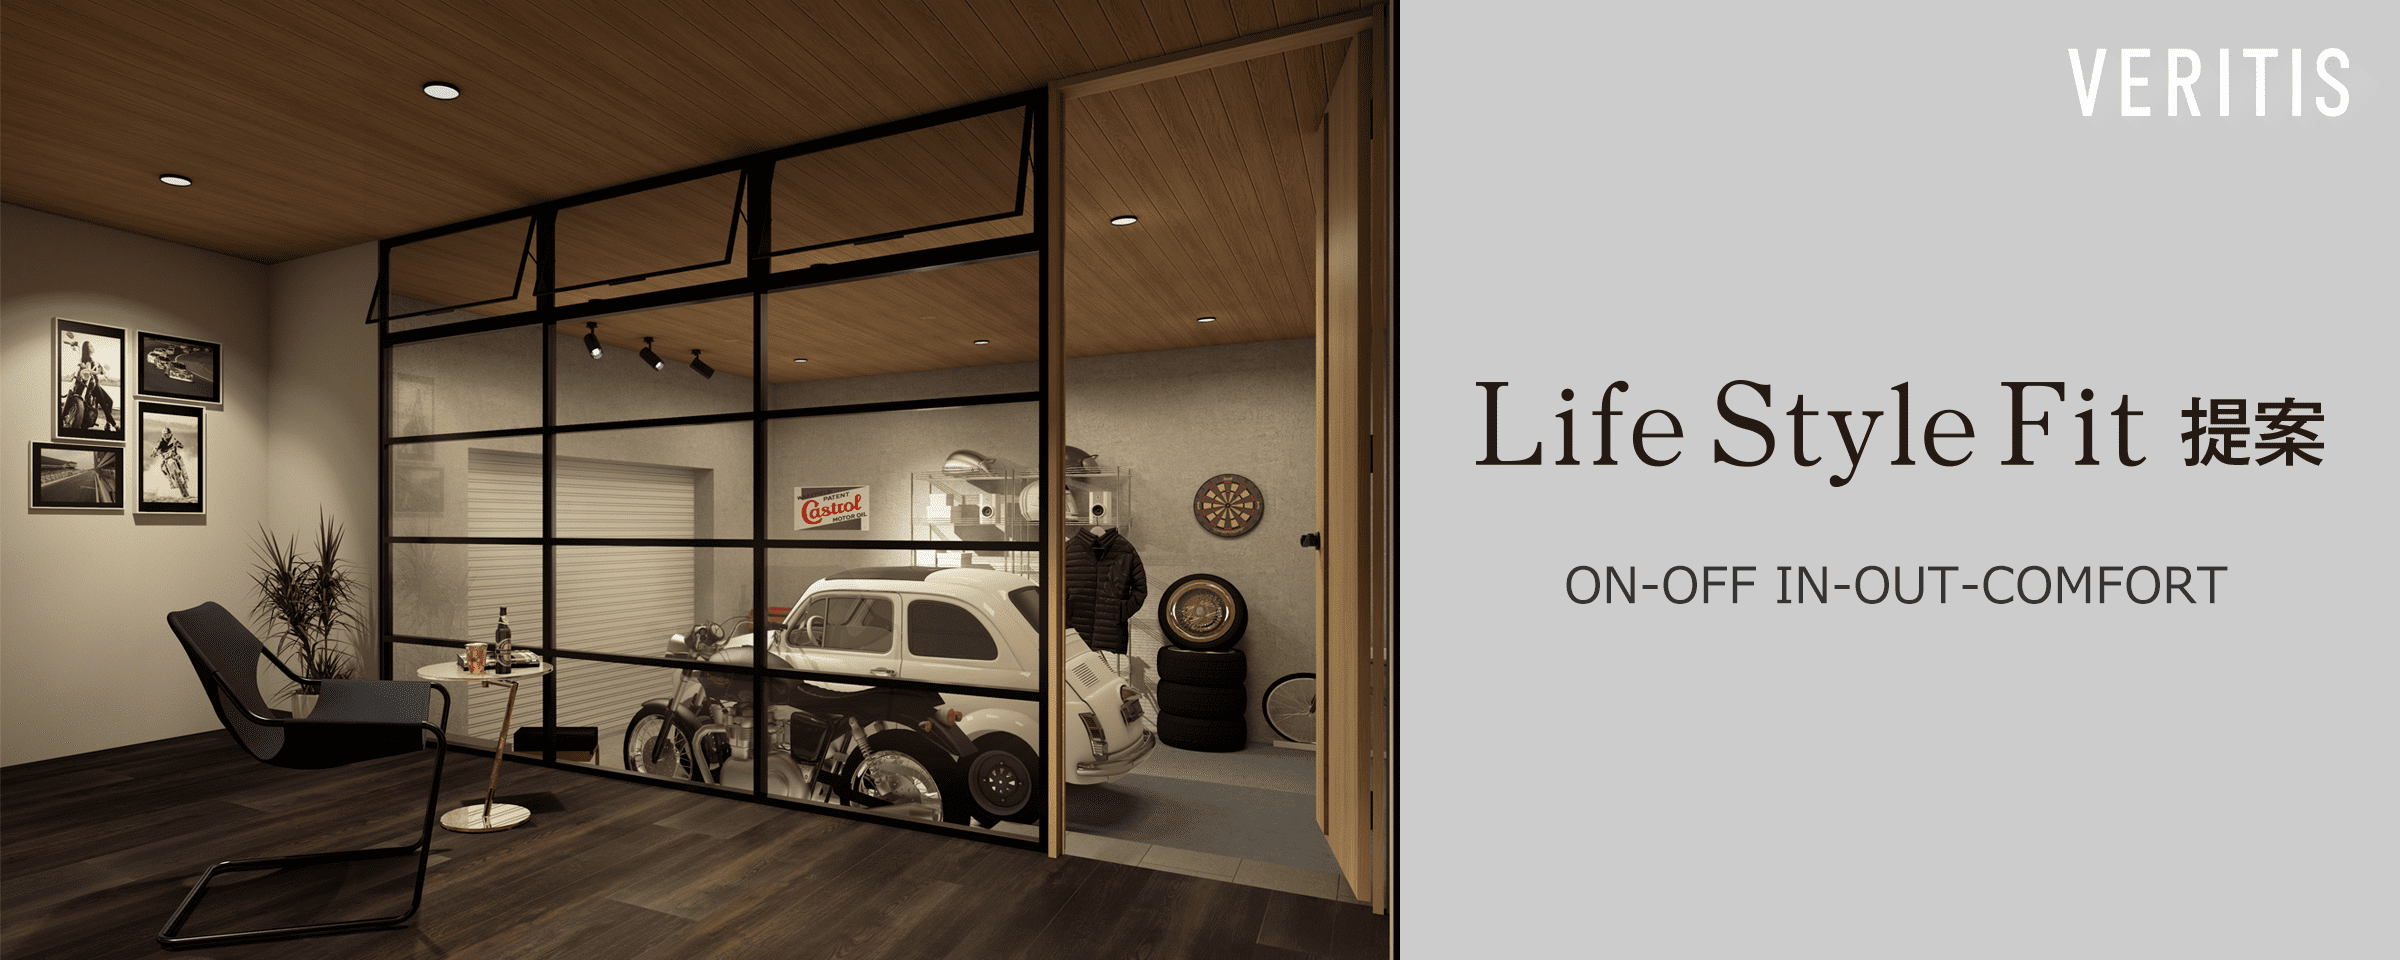 Life style Fit 提案 ON-OFF IN-OUT-COMFORT